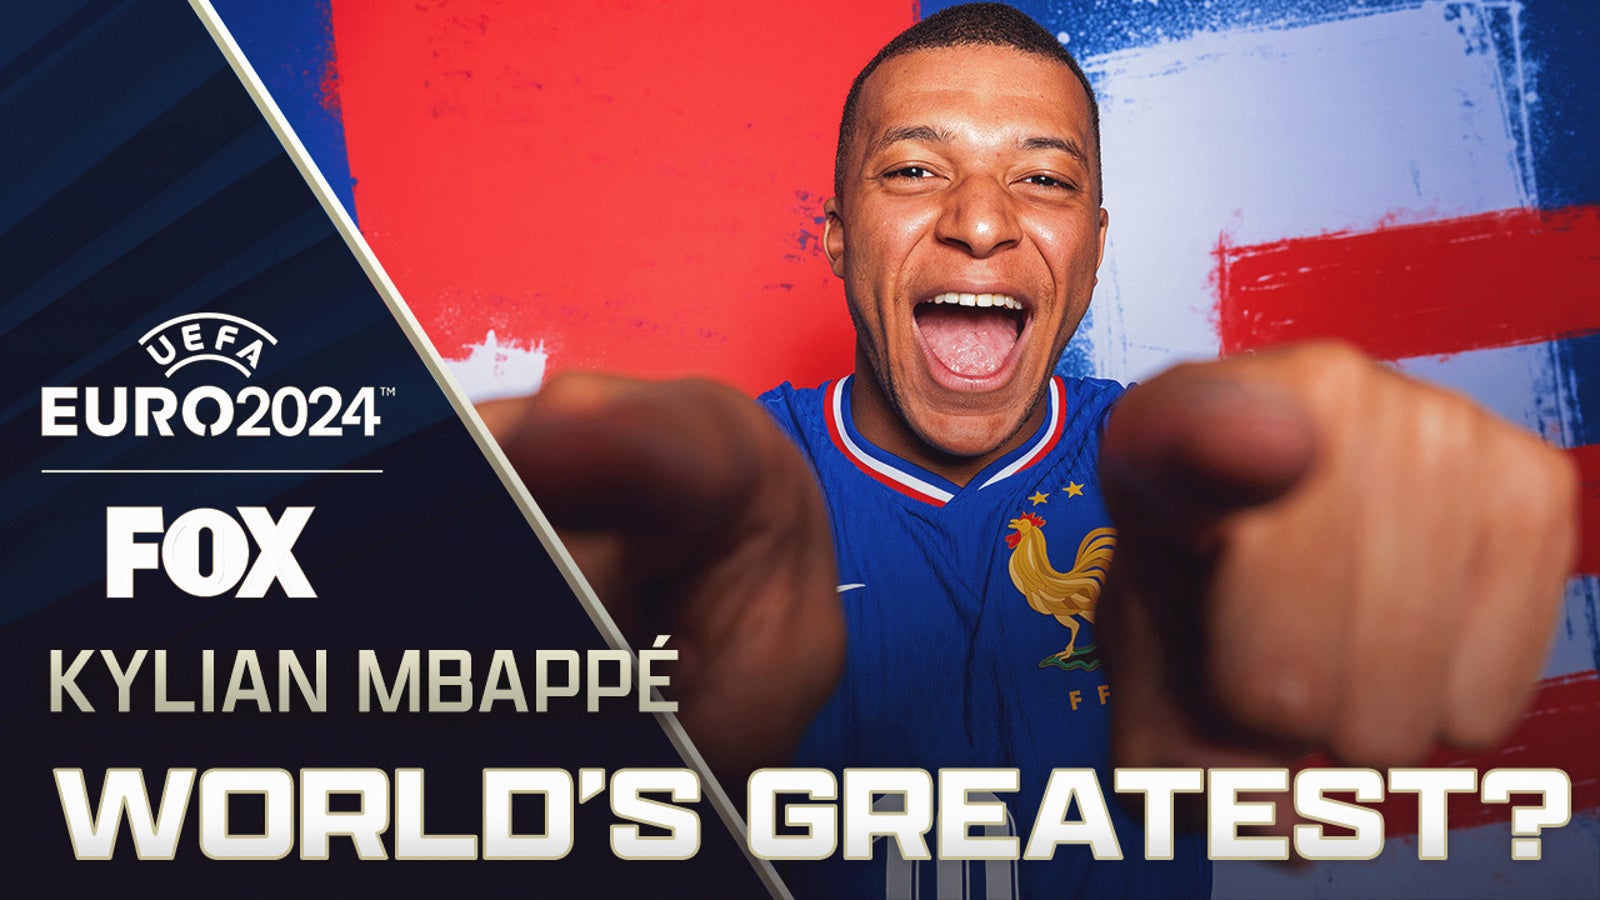 France's Kylian Mbappé looks to bring home 2024 European Championship